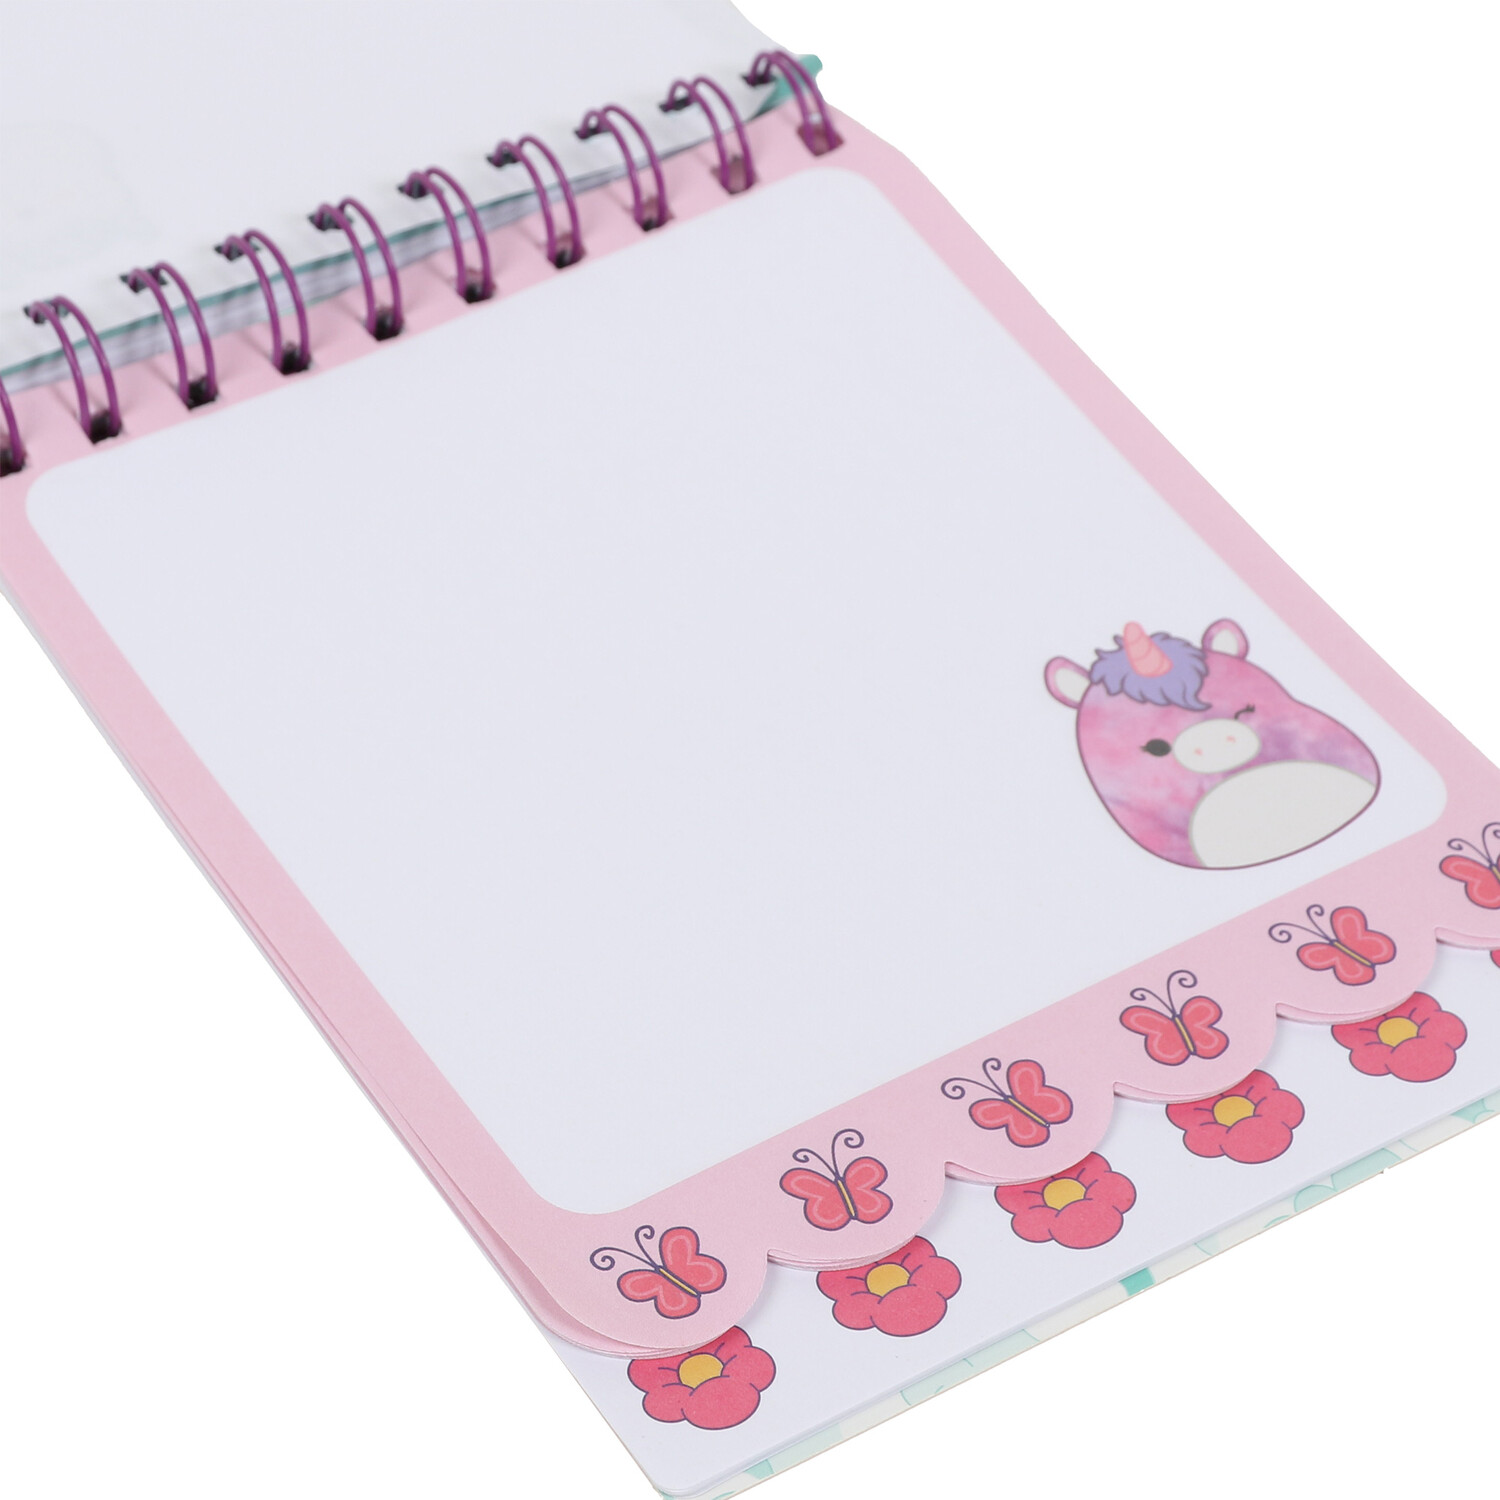 Squishmallows Pink Layered Notebook Image 3